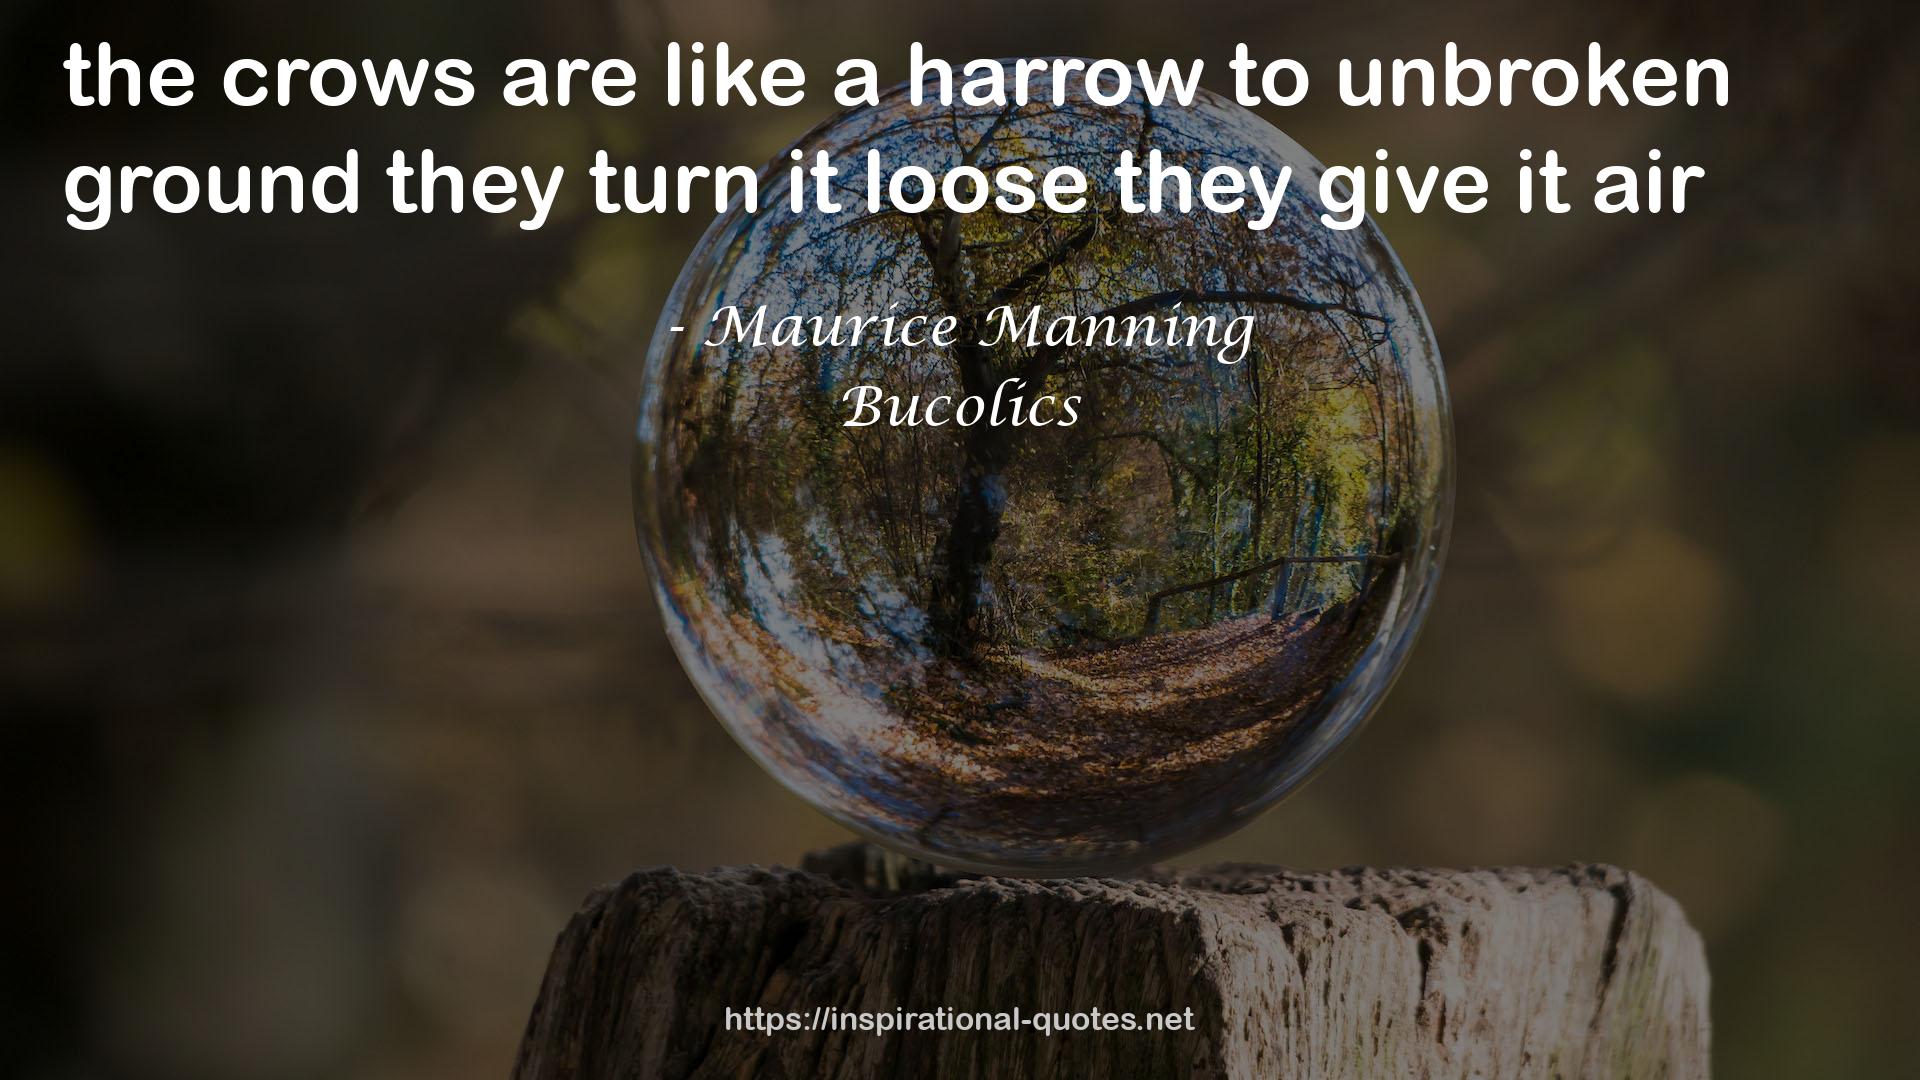 Maurice Manning QUOTES